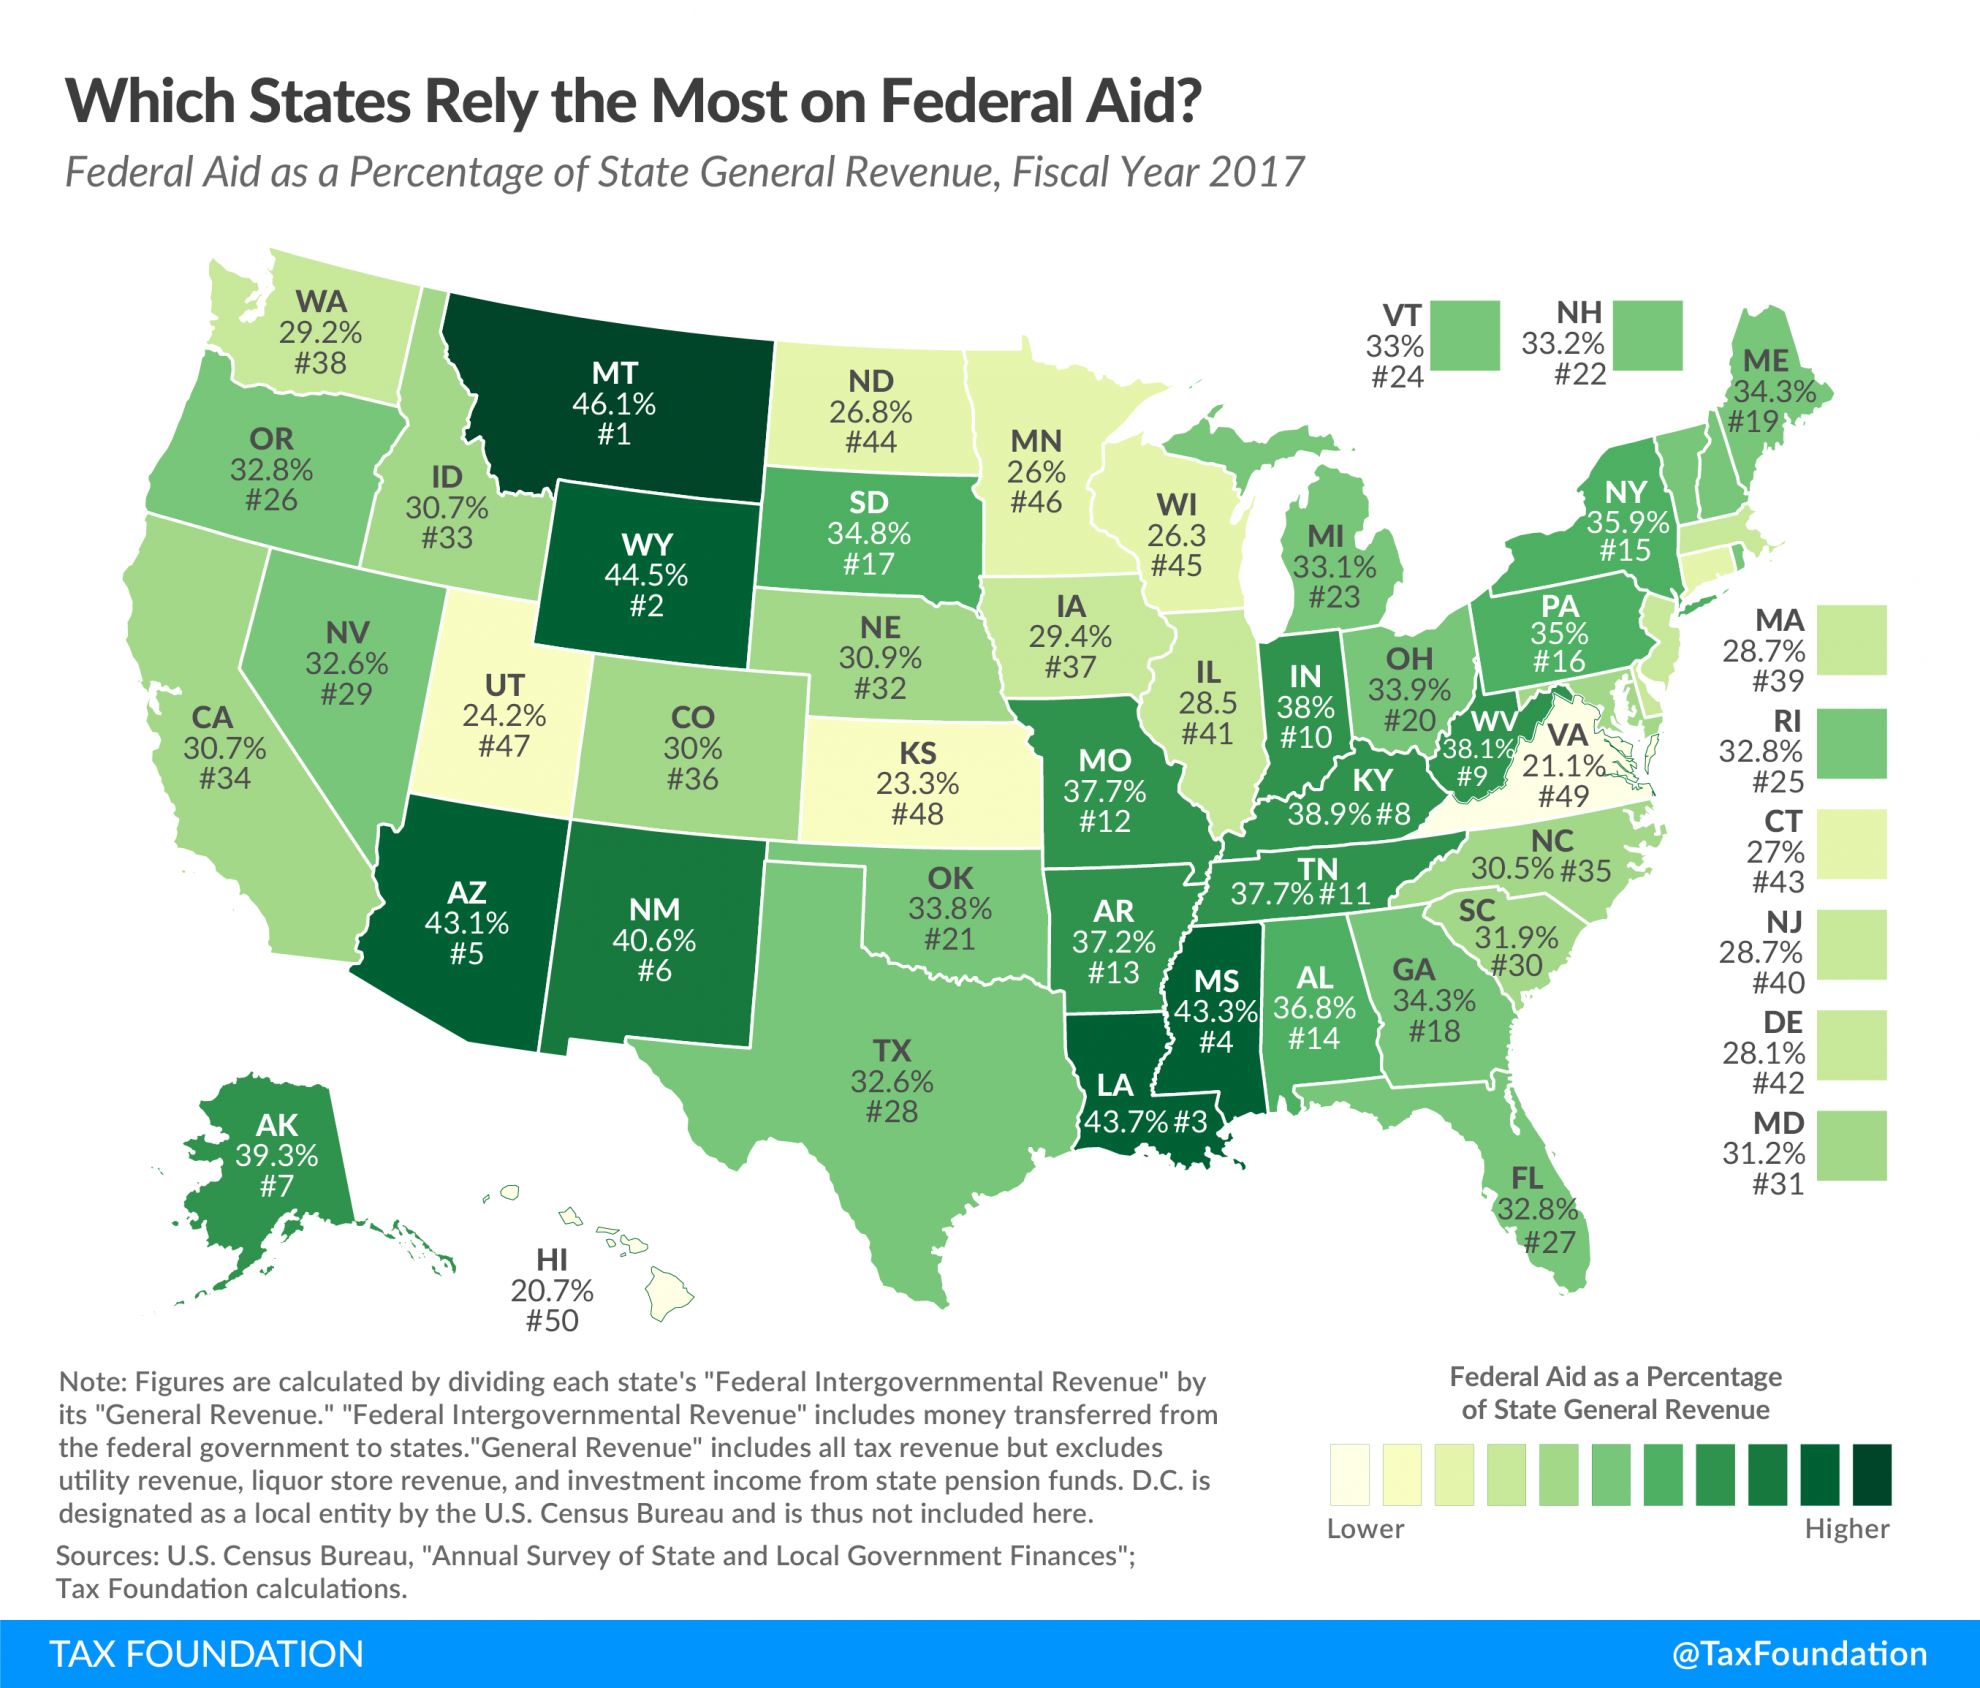 State federal aid reliance 2020. Which states rely the most on federal aid? Which states receive the most federal aid?